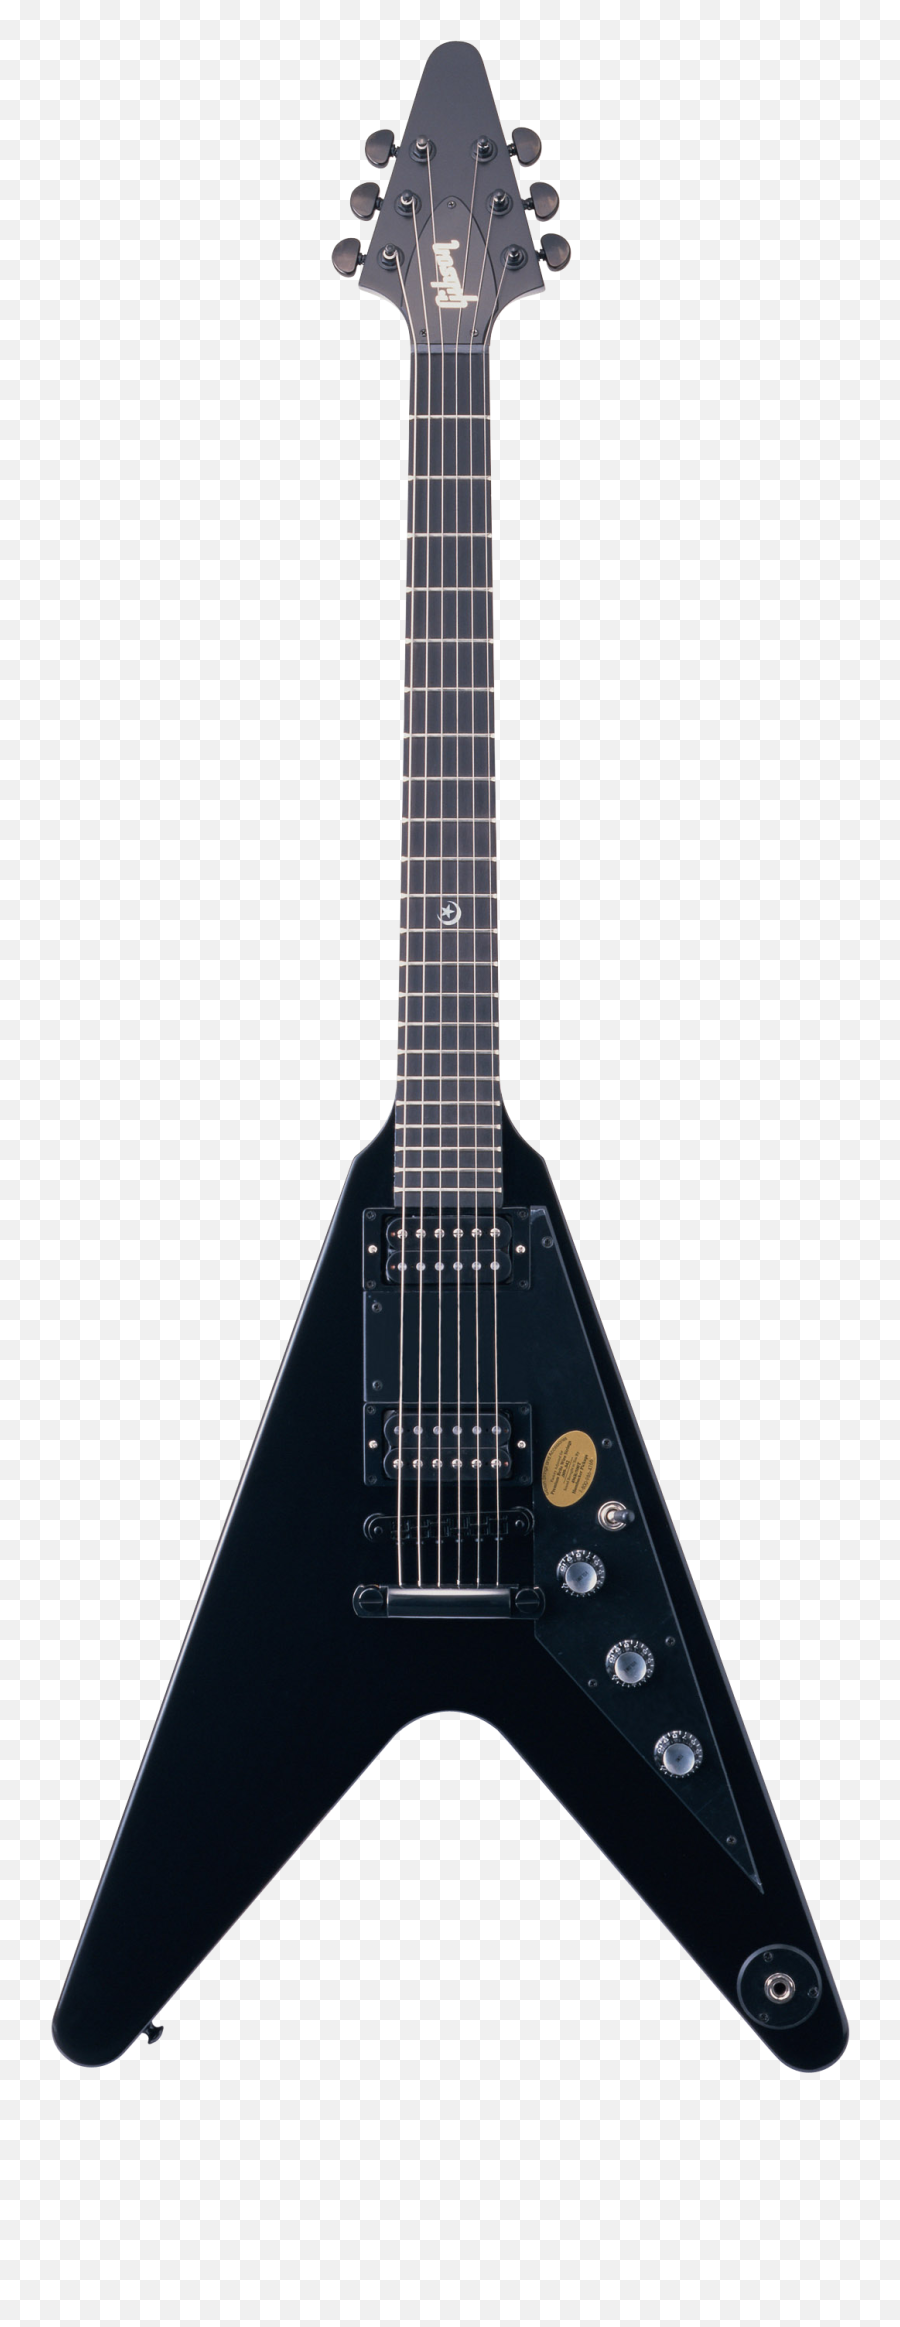 Guitar Png Images Free Picture Download - Gibson Flying V Melody Maker,Guitar Png